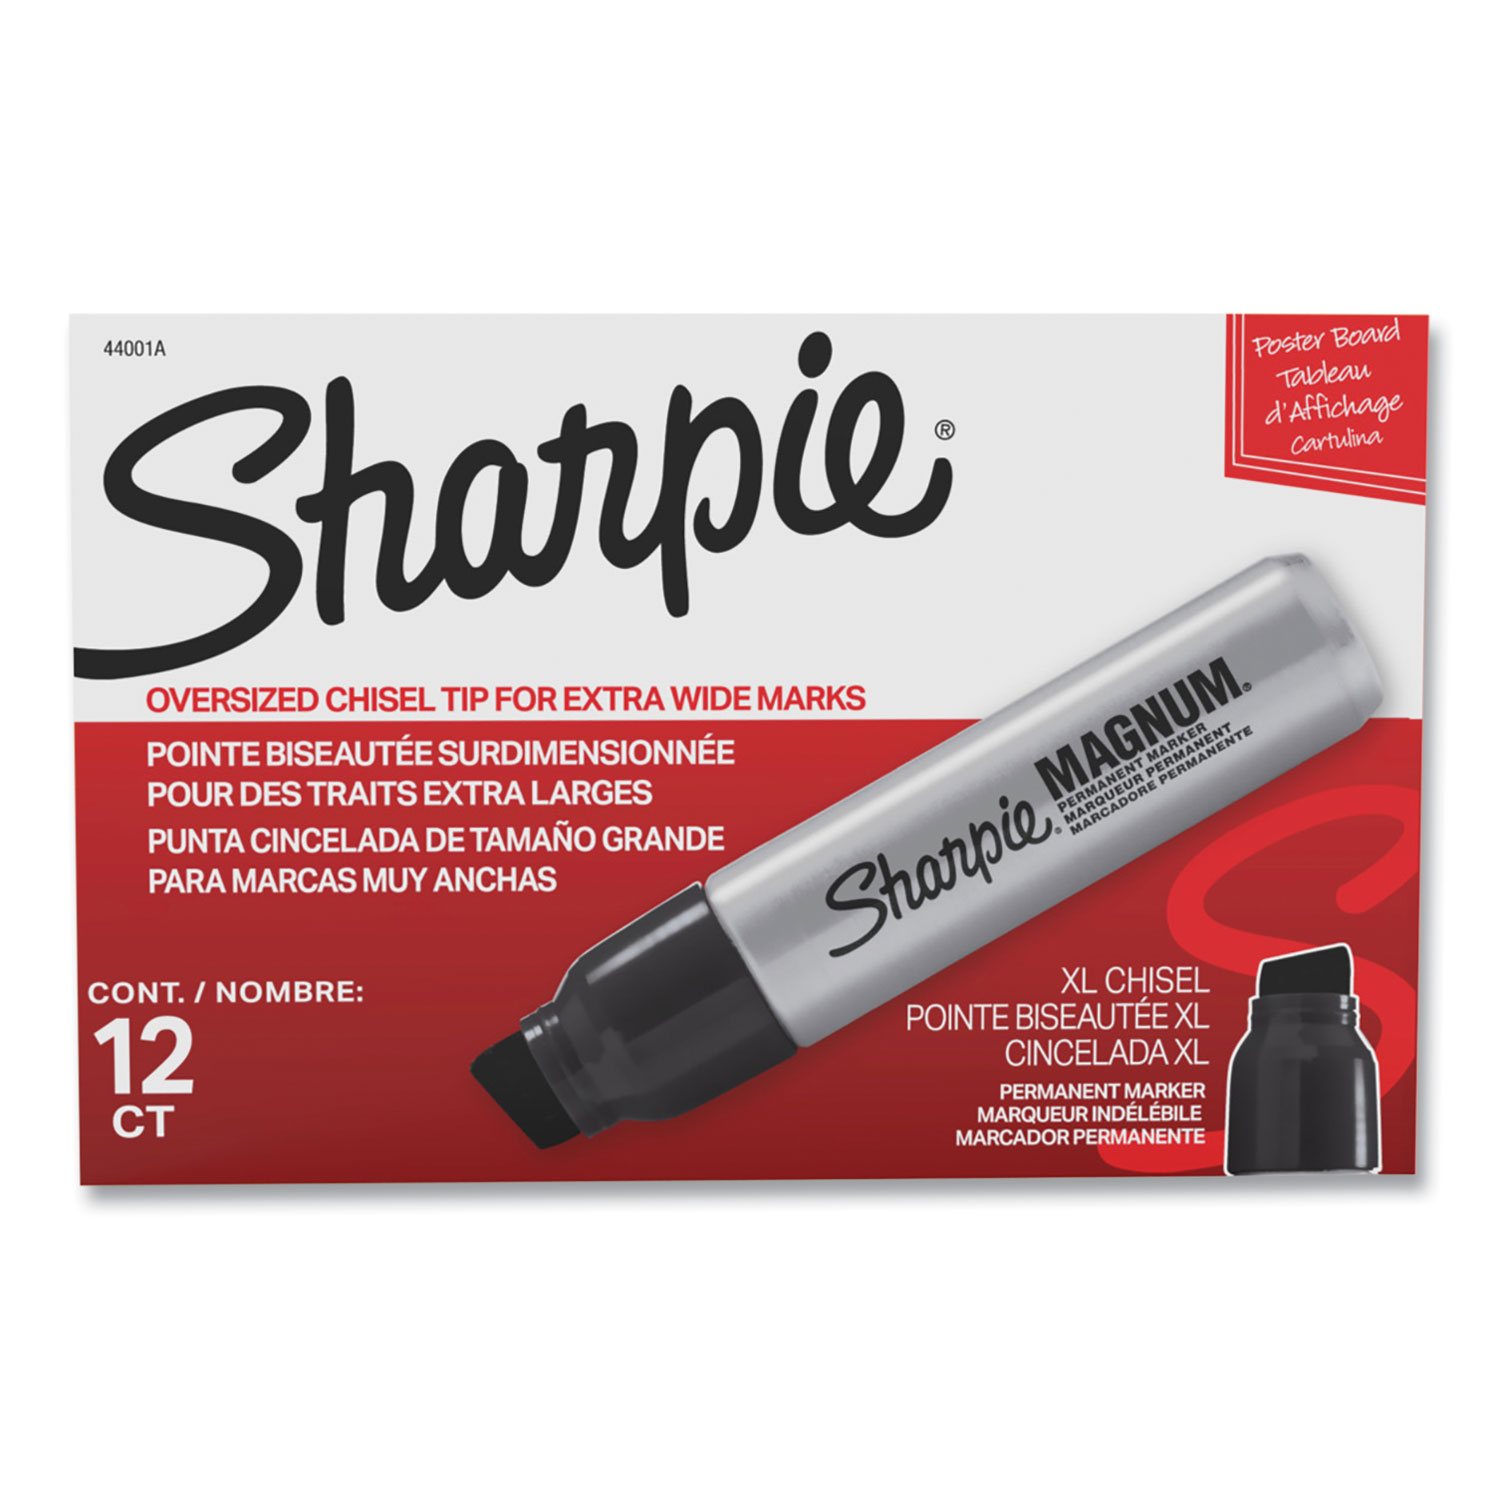 SHARPIE King Size Permanent Marker Large Chisel Tip, Great for Poster  Boards, Black, 4 Count